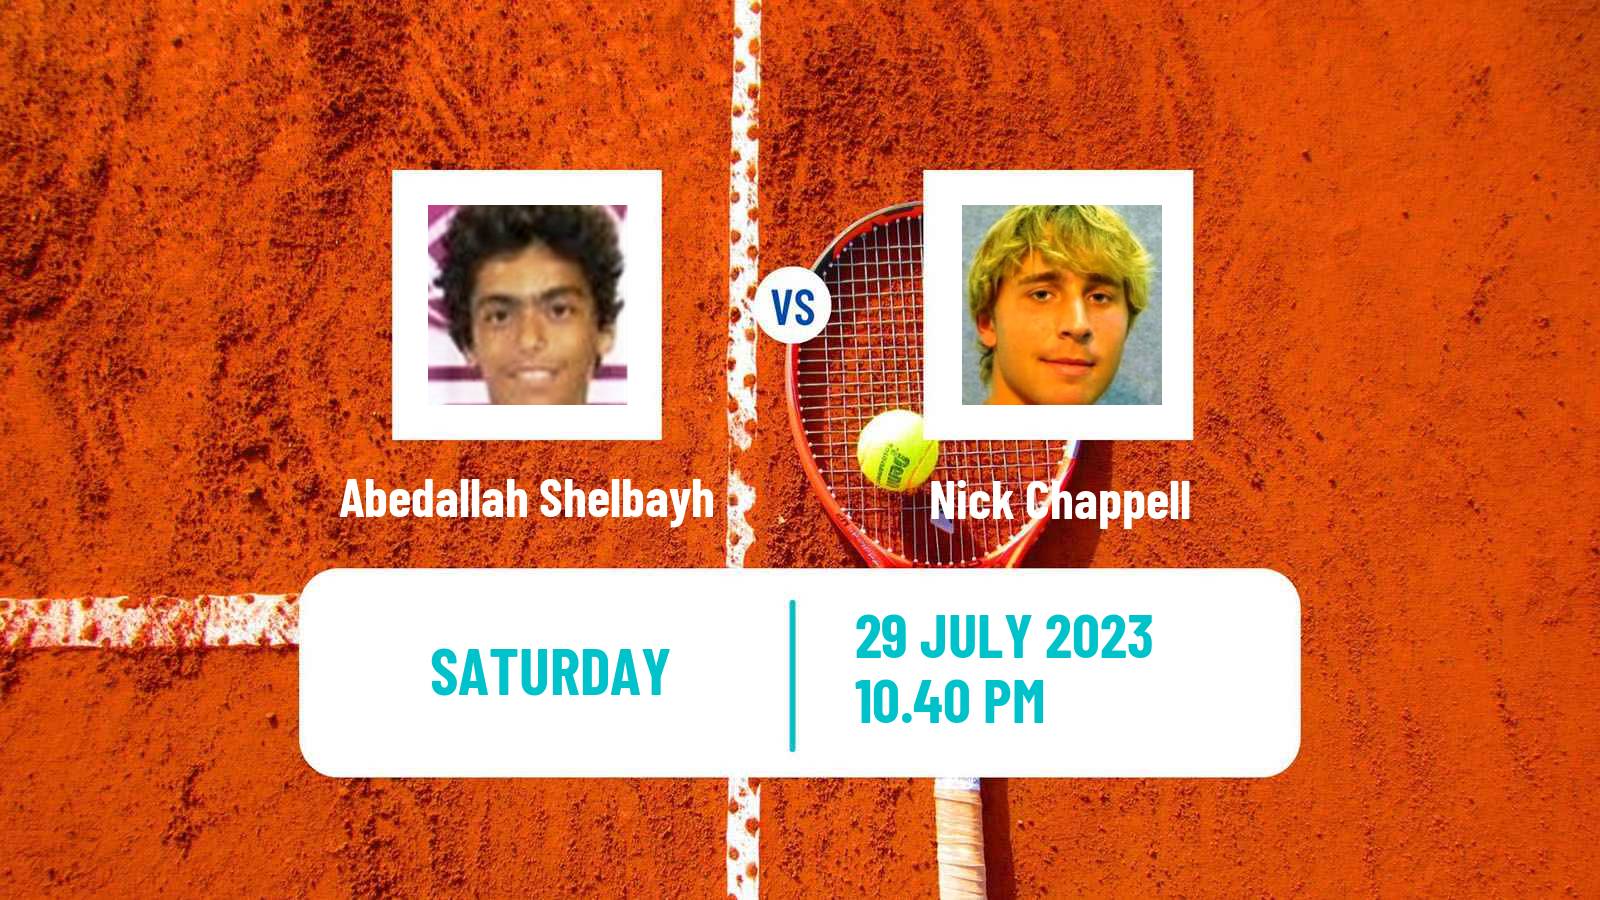 Tennis ATP Los Cabos Abedallah Shelbayh - Nick Chappell